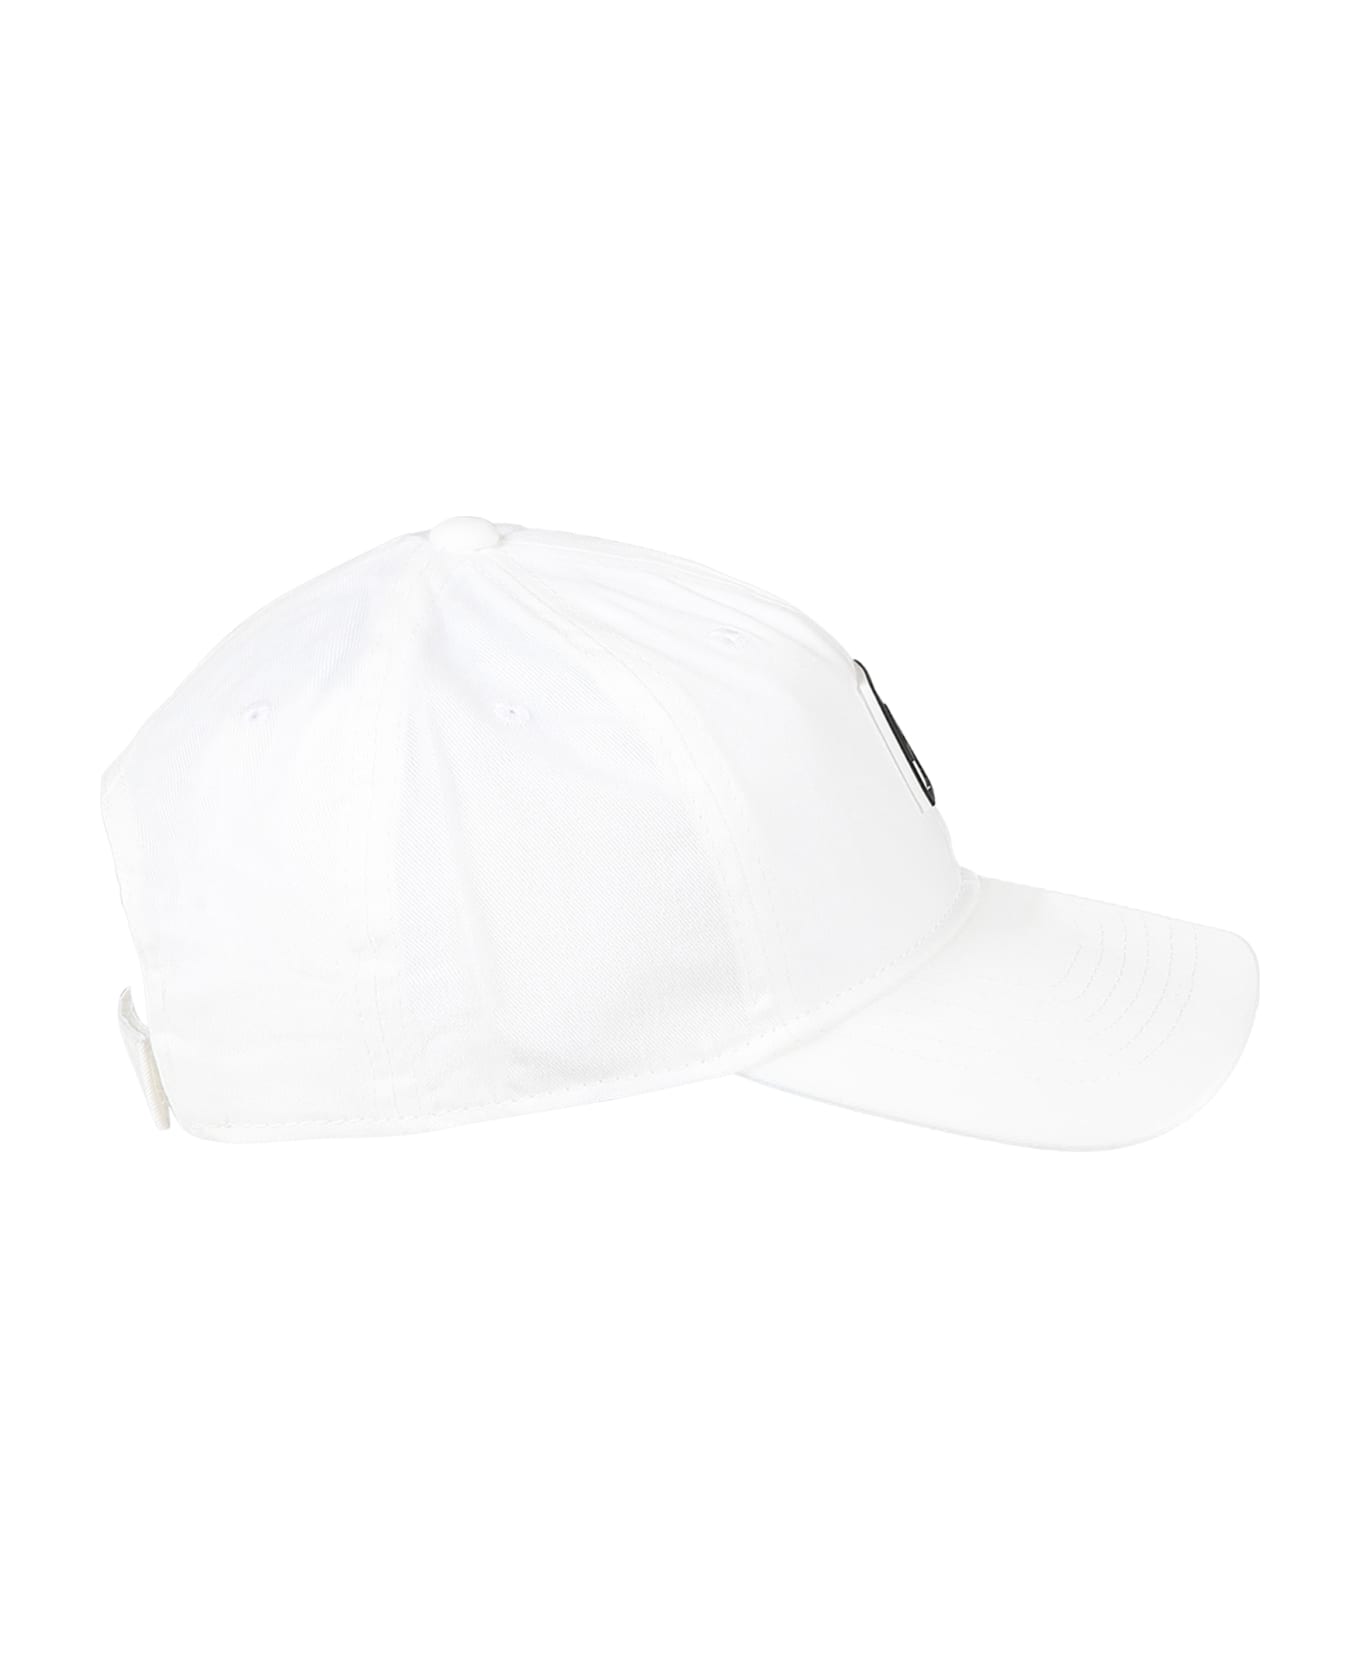 Nike White Hat For Kids With Logo - White アクセサリー＆ギフト